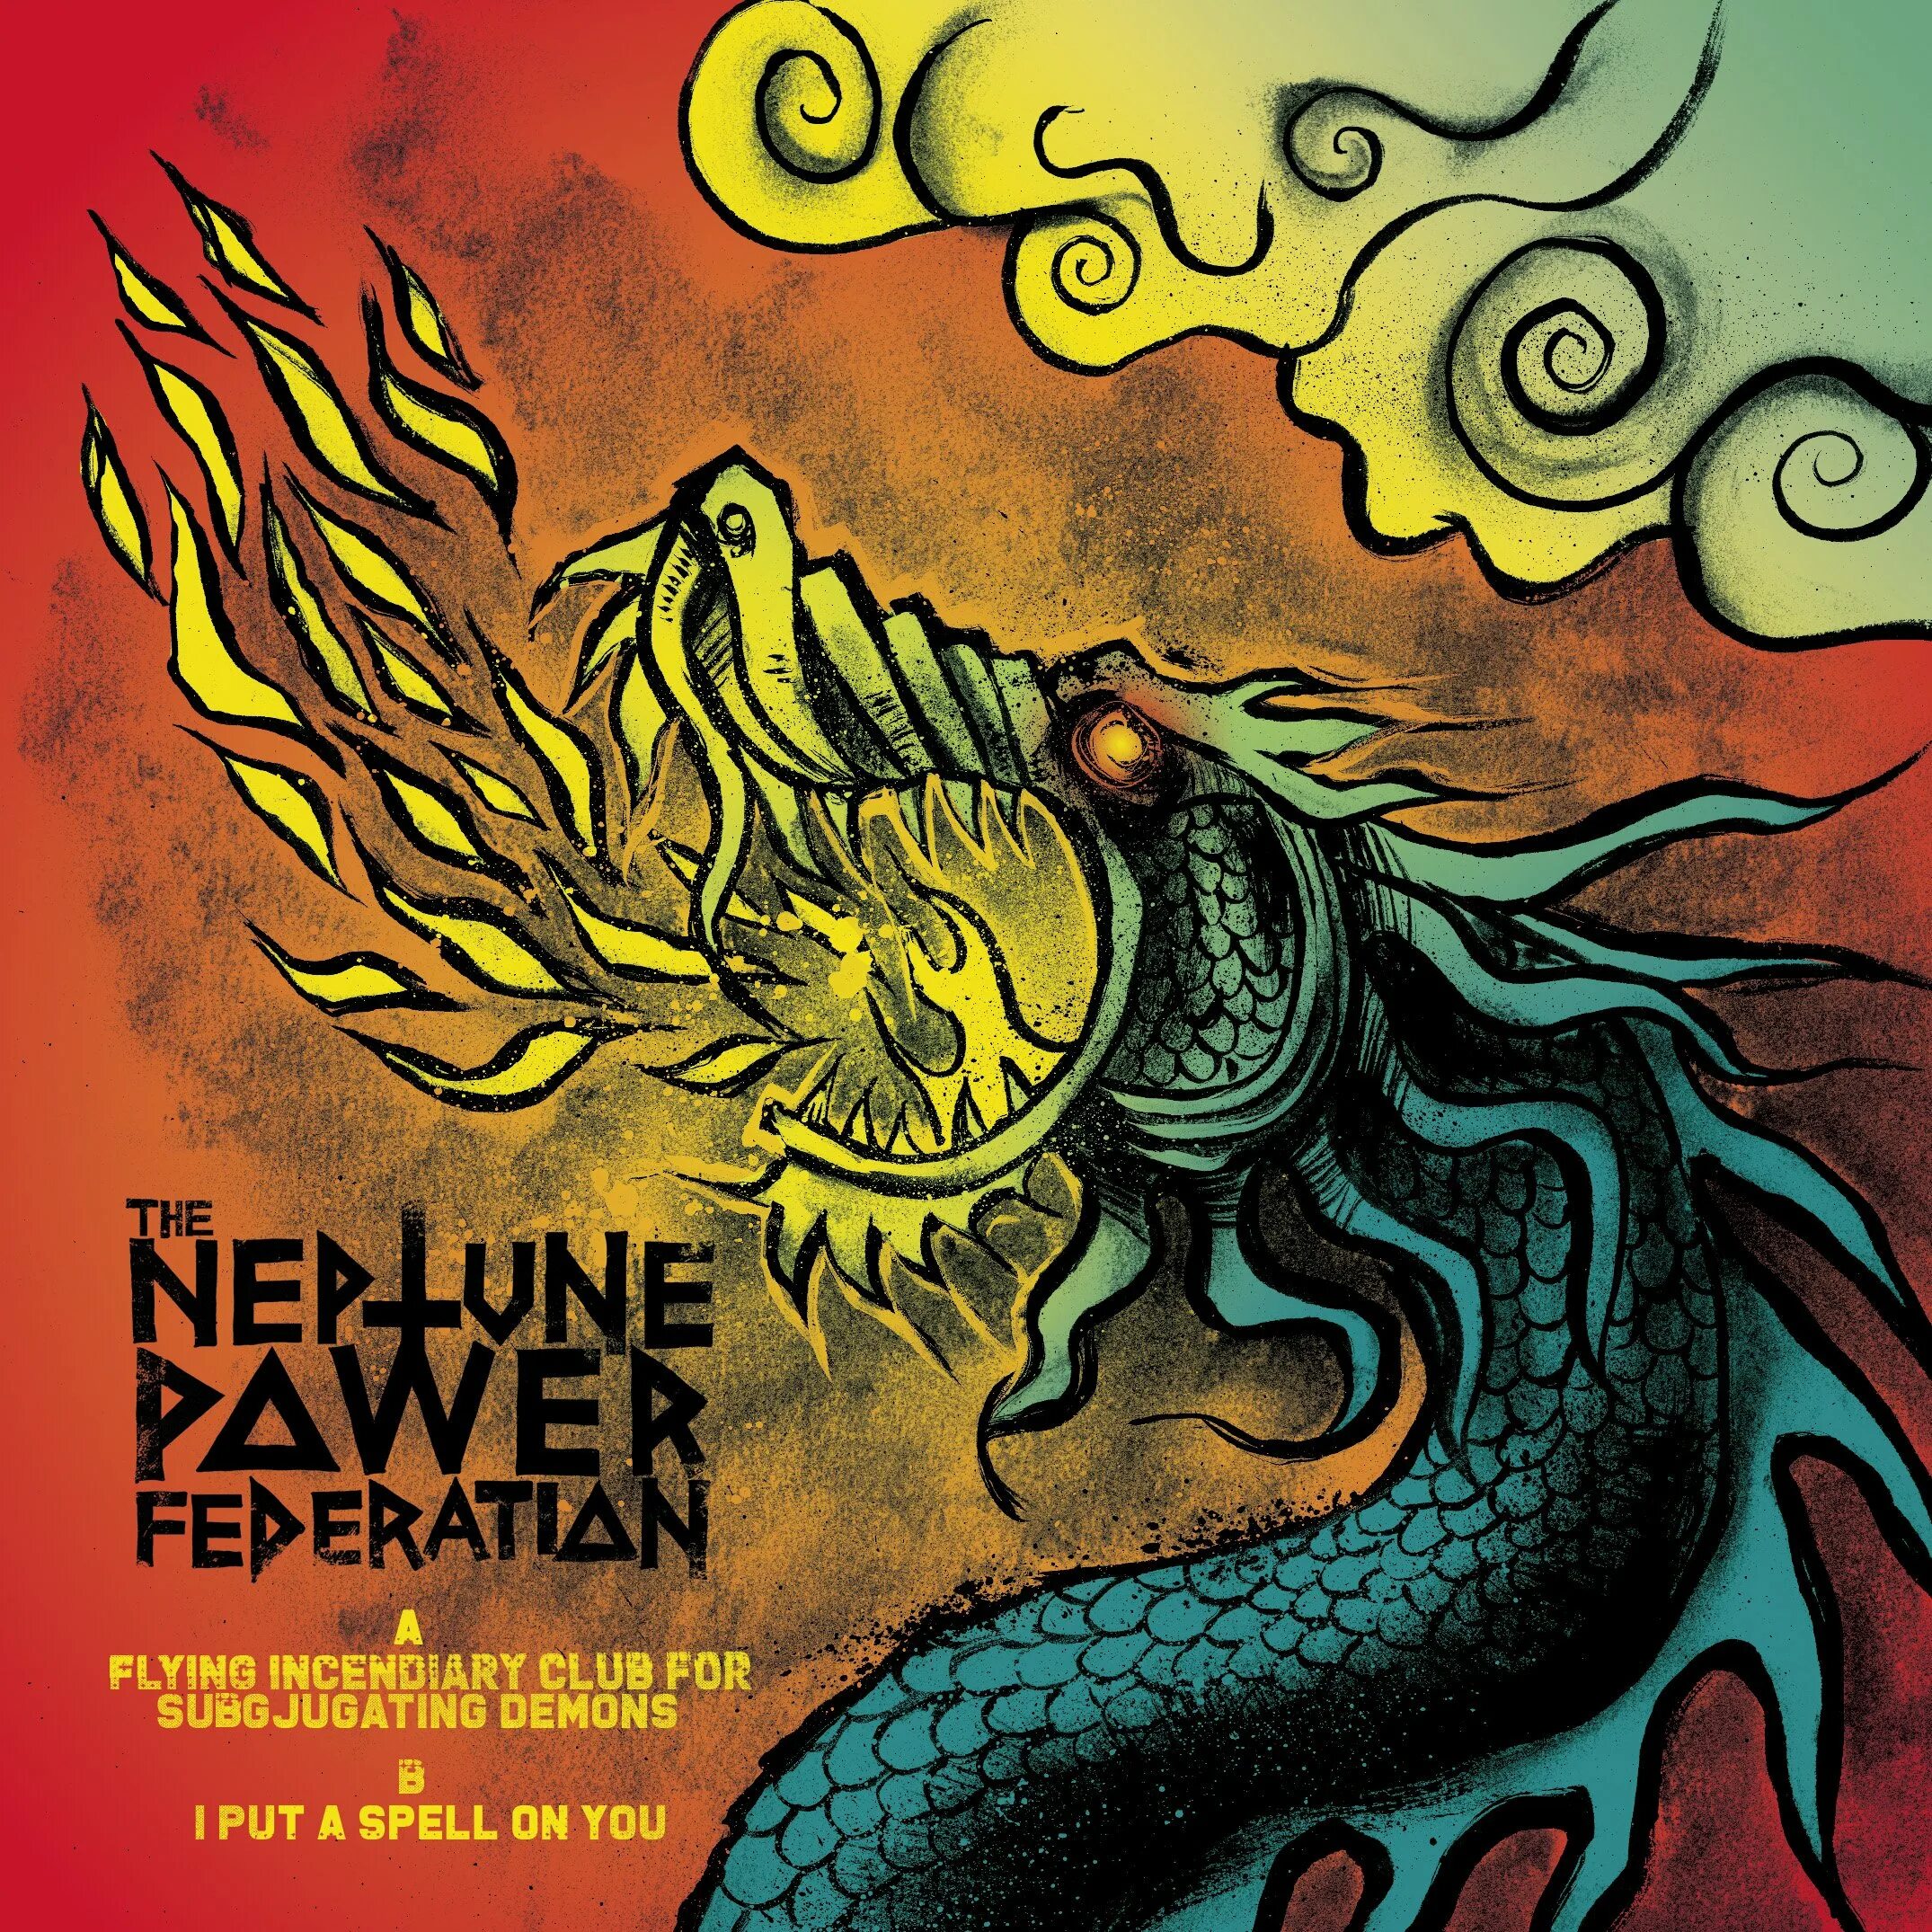 The Neptune Power Federation. Incendiary Band. The Neptune Power Federation Neath a Shin ei Sun. Incendiary Music. Power federation